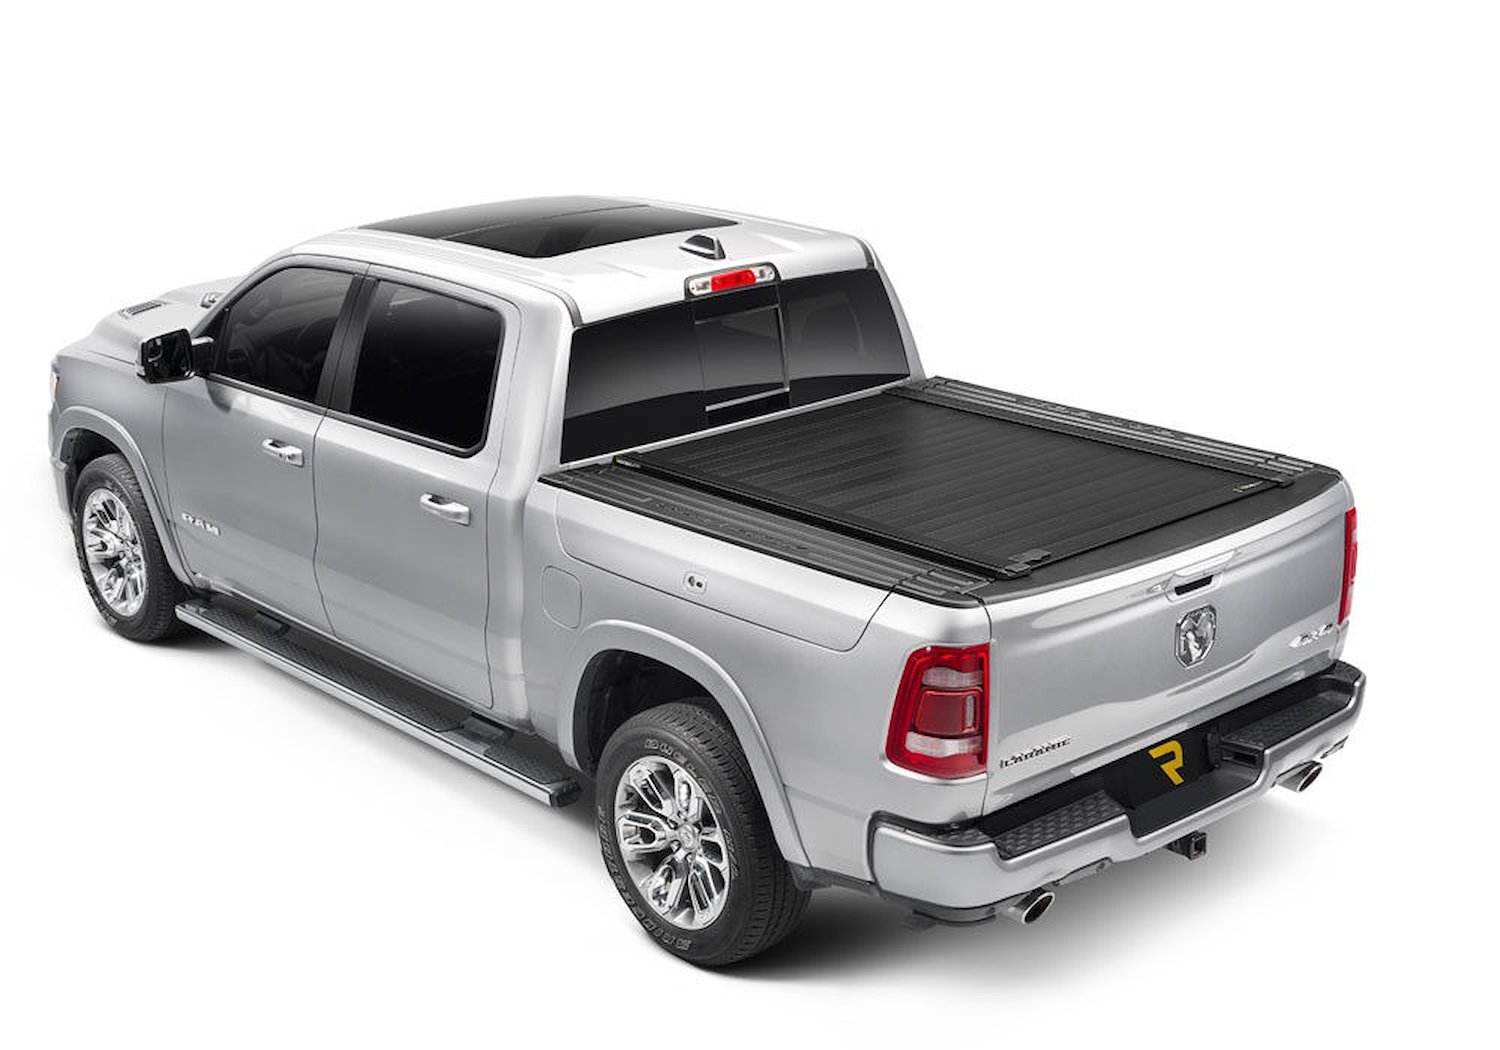 T-80244 RetraxPRO XR Retractable Tonneau Cover Fits Select Ram 5' 7" Bed with RamBox